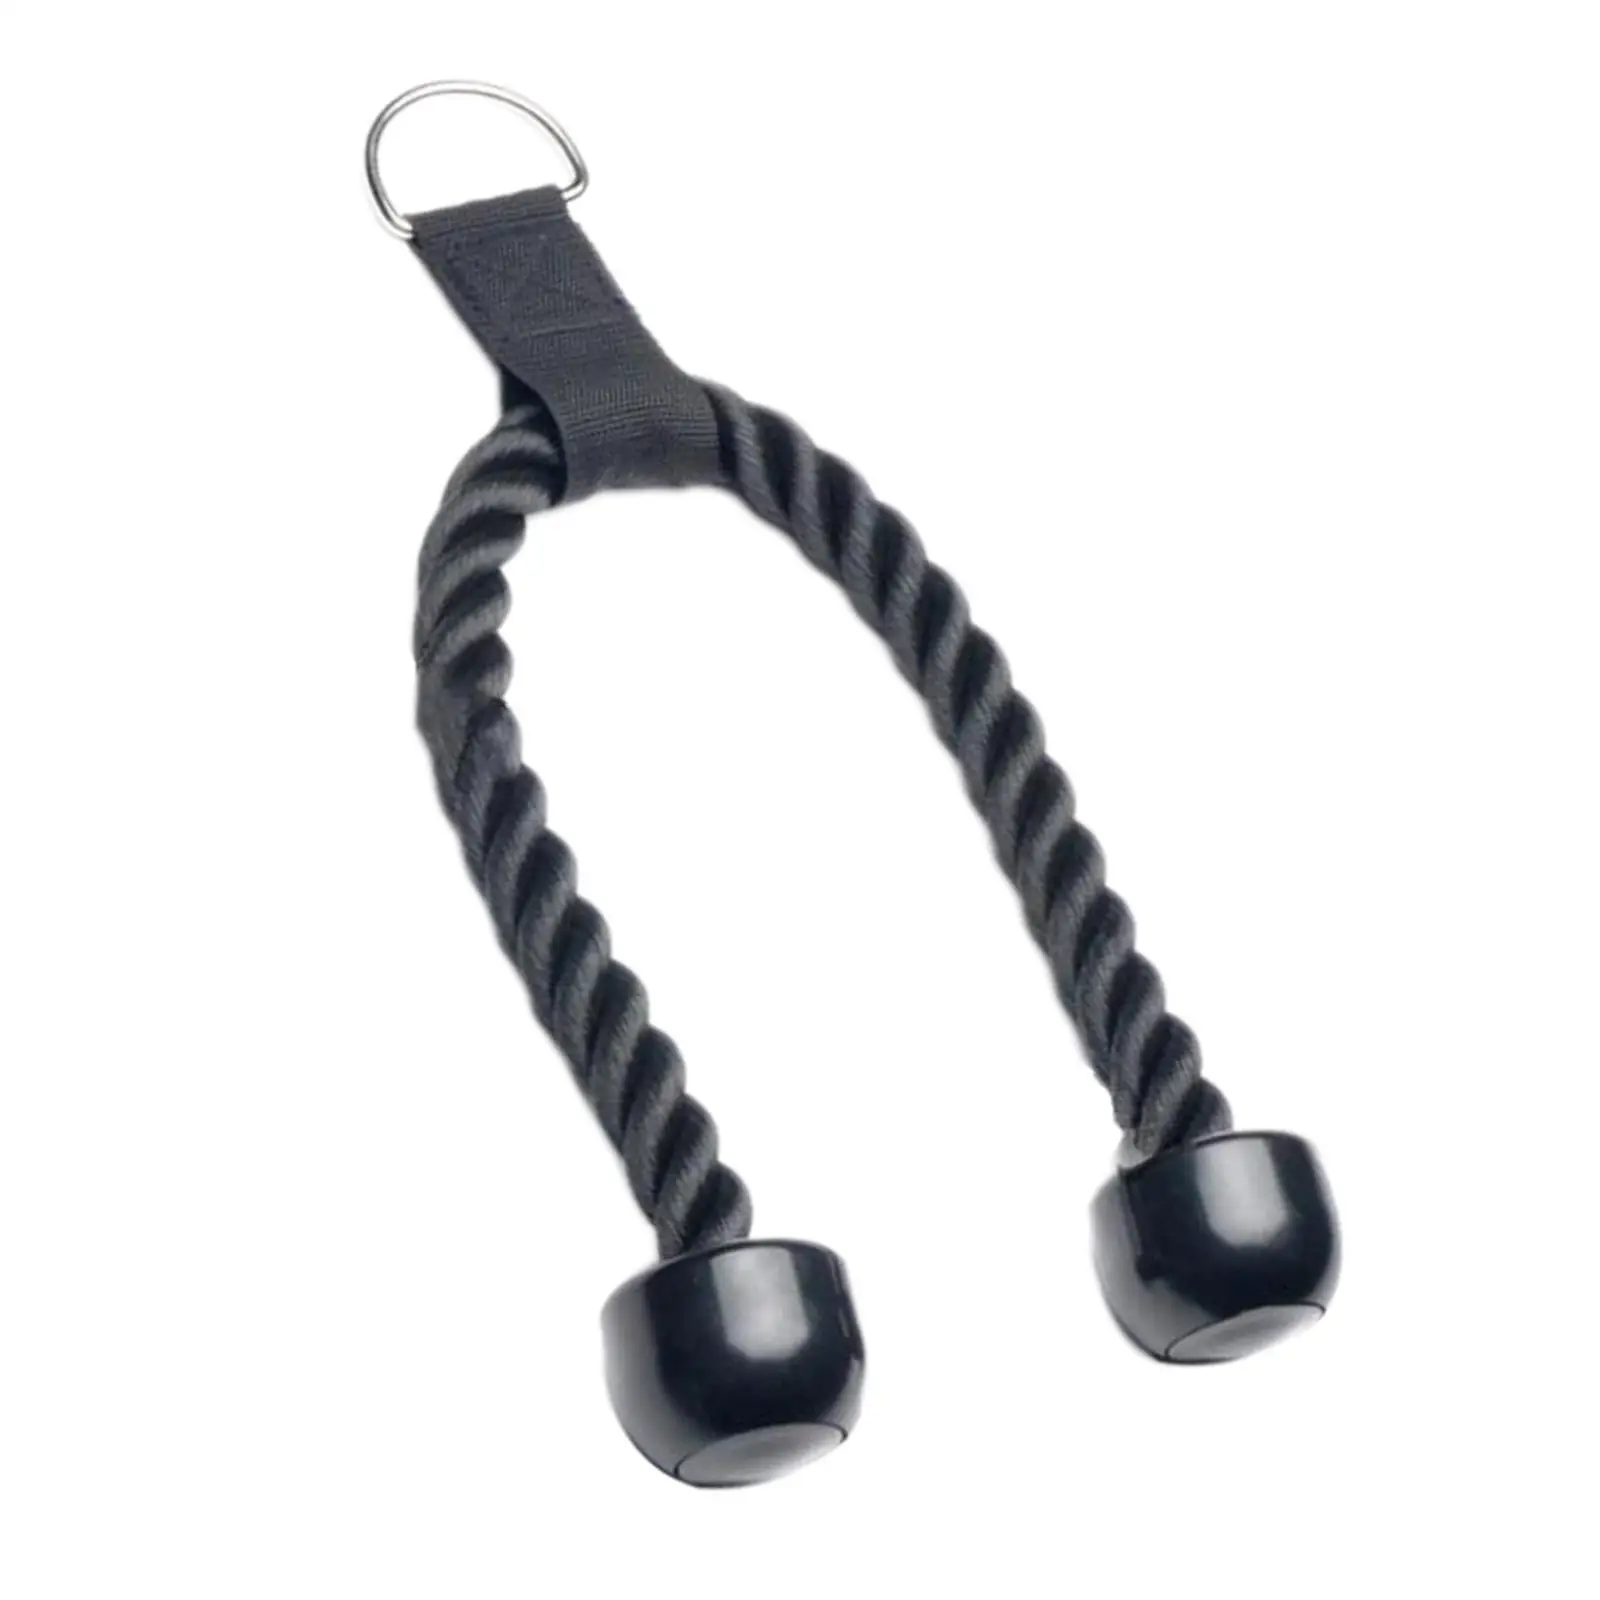 70cm Tricep Rope Accessories Pull Down Attachment Fitness Shoulder Muscle